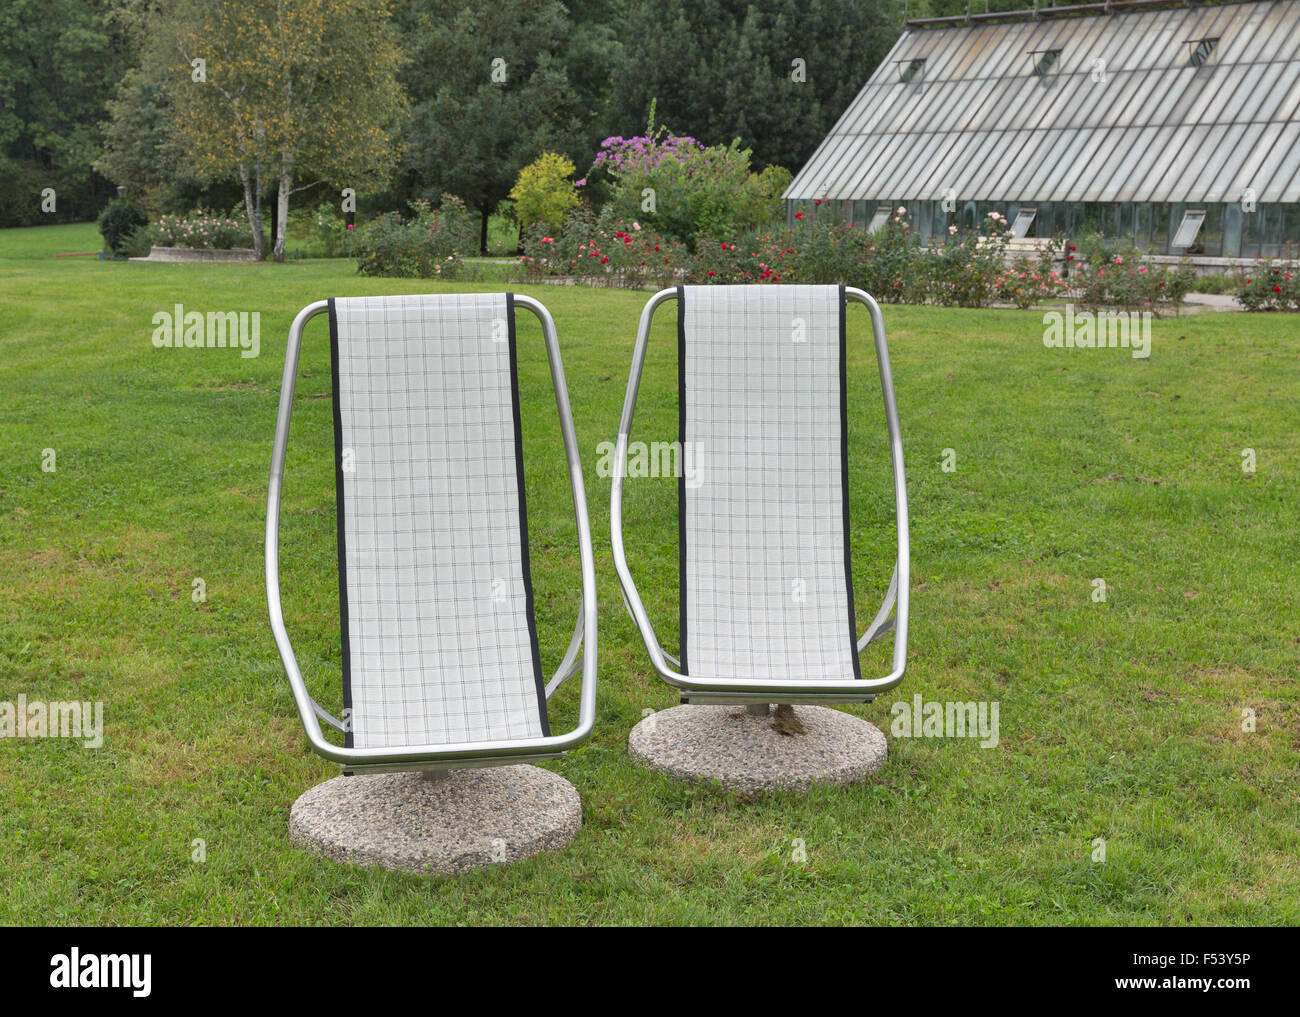 two stationary chairs for outdoor recreation closeup in front of greenhouse Stock Photo